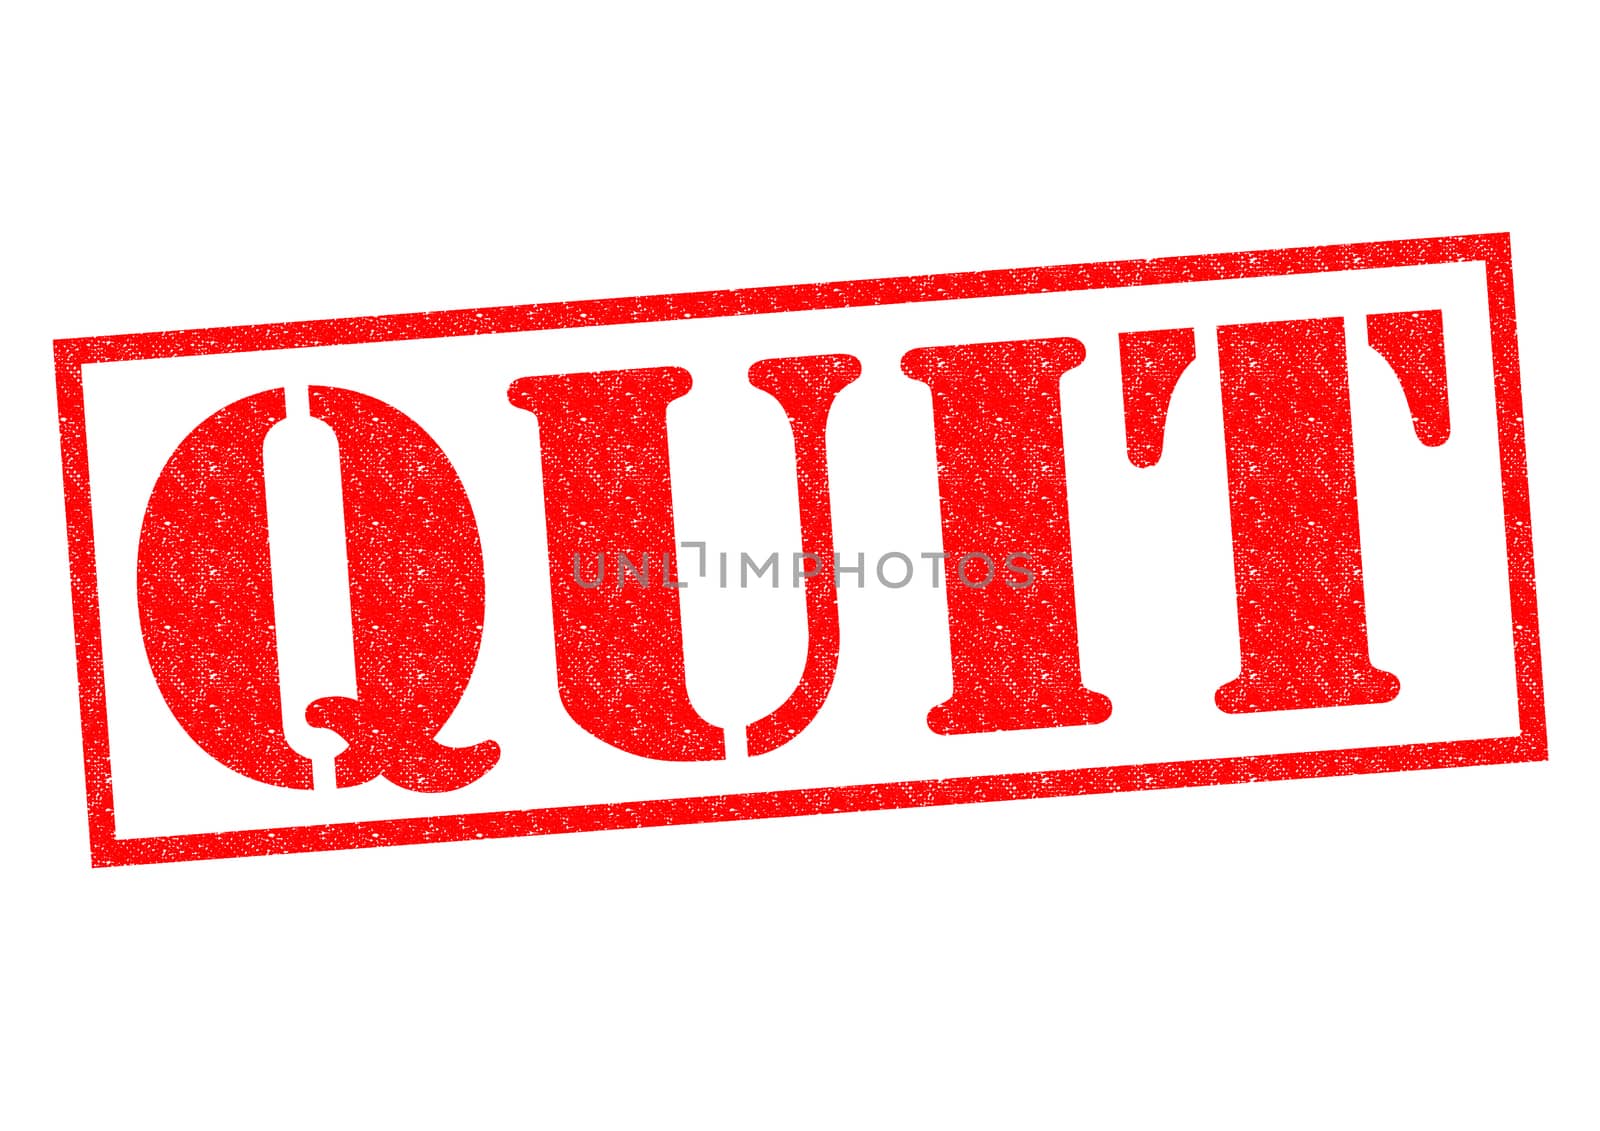 QUIT red Rubber Stamp over a white background.